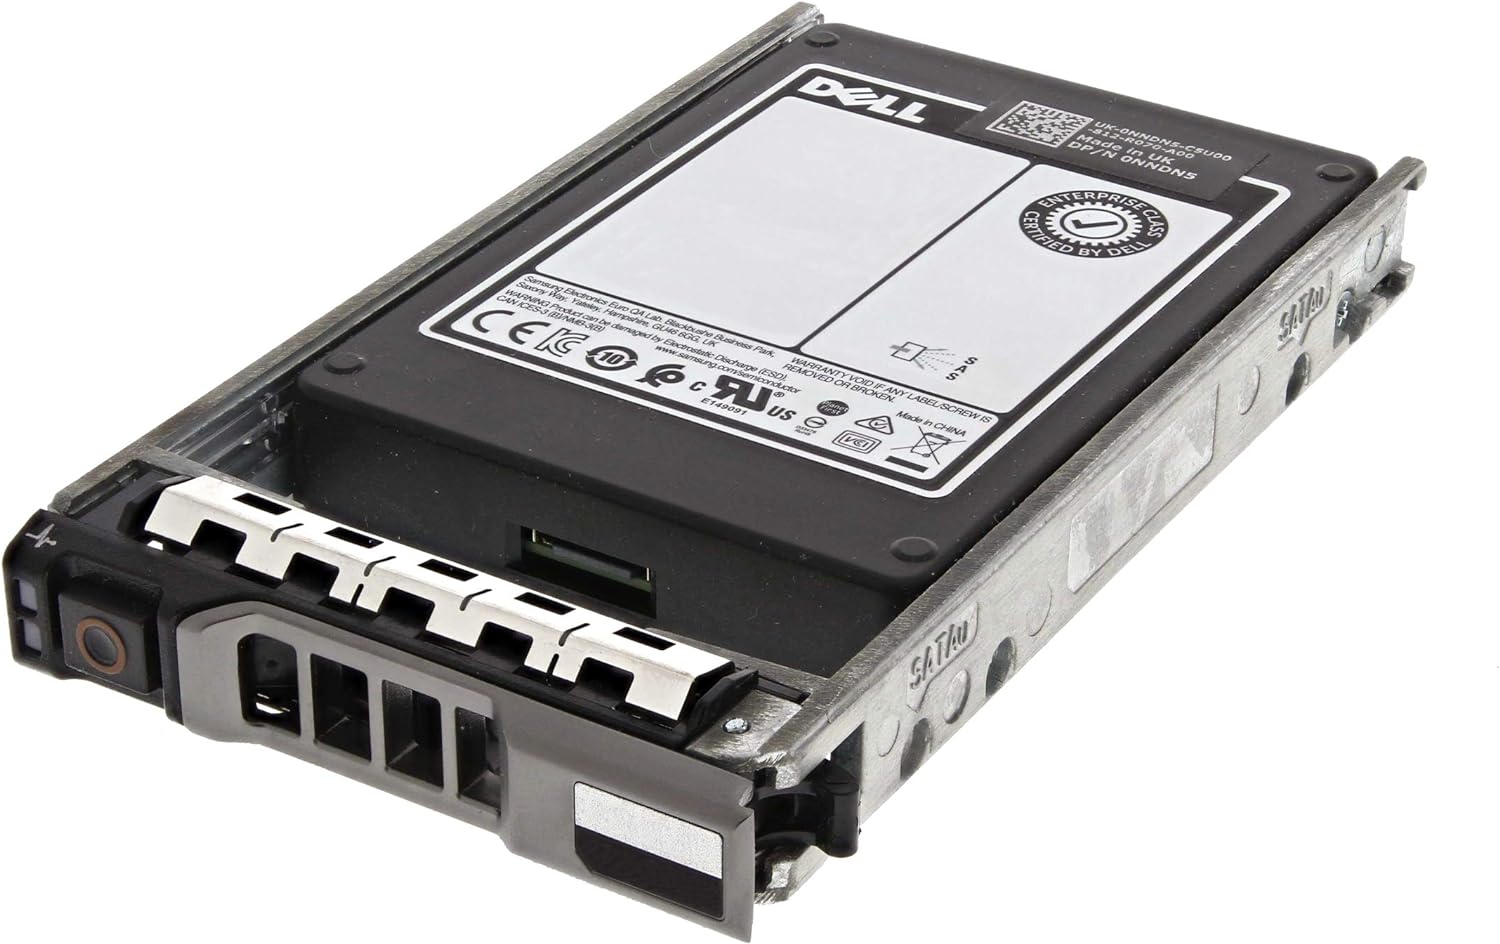 Dell 1.6TB 6Gb/s 2.5 SATA Solid State Drive Bundle with Tray, Compatible PowerEdge R610, R620, R630, R710, R720, R730, R730XD Servers